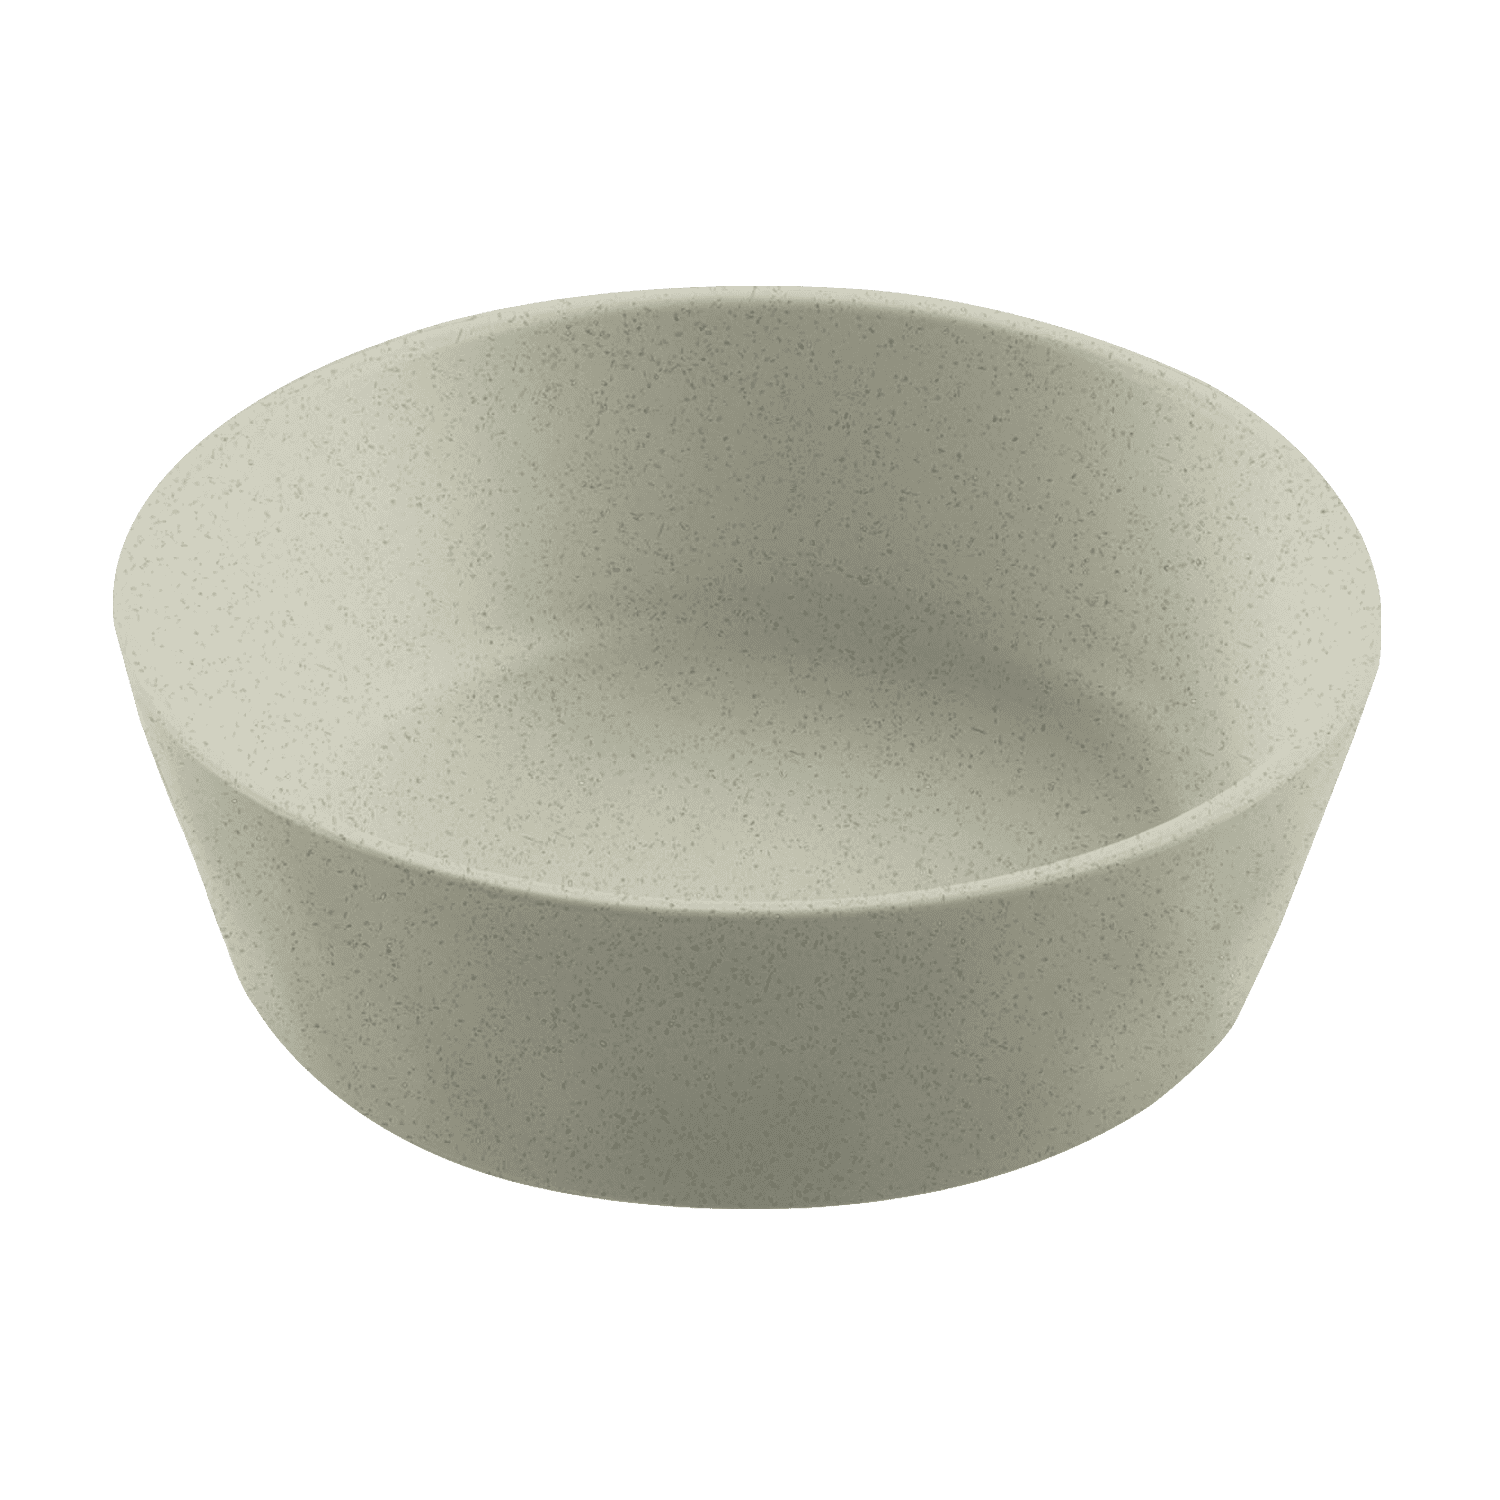 Bone Appétit: Eco-Friendly Bamboo Dog Pet Bowls with Stainless Steel Liner